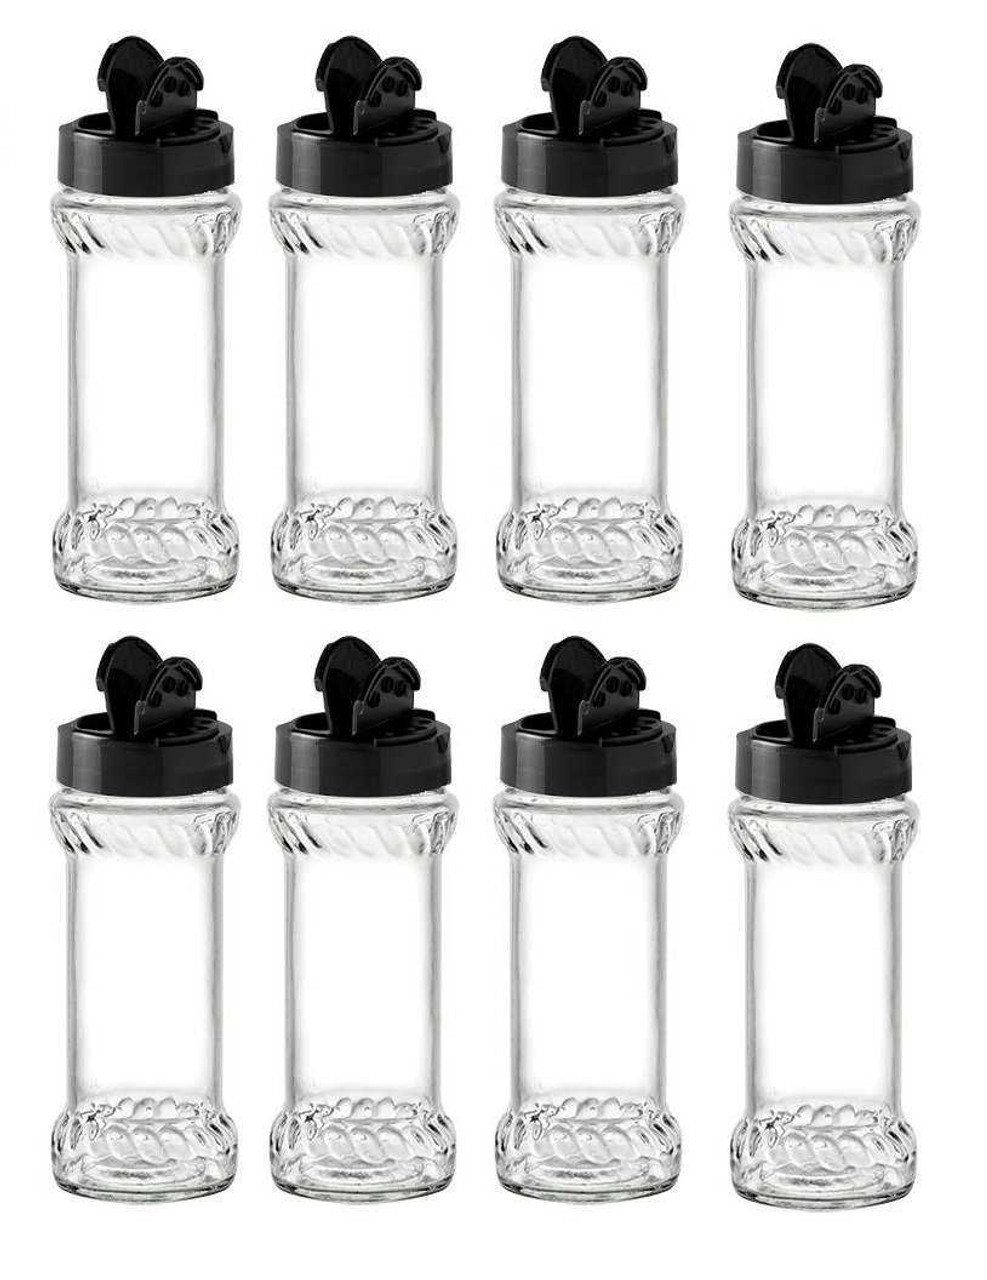 Salt and Pepper Shakers Spice Jar Bottle Seasoning Jar With Lid Glass Jar  Container Kitchen Storage Jars for Spices Organizer